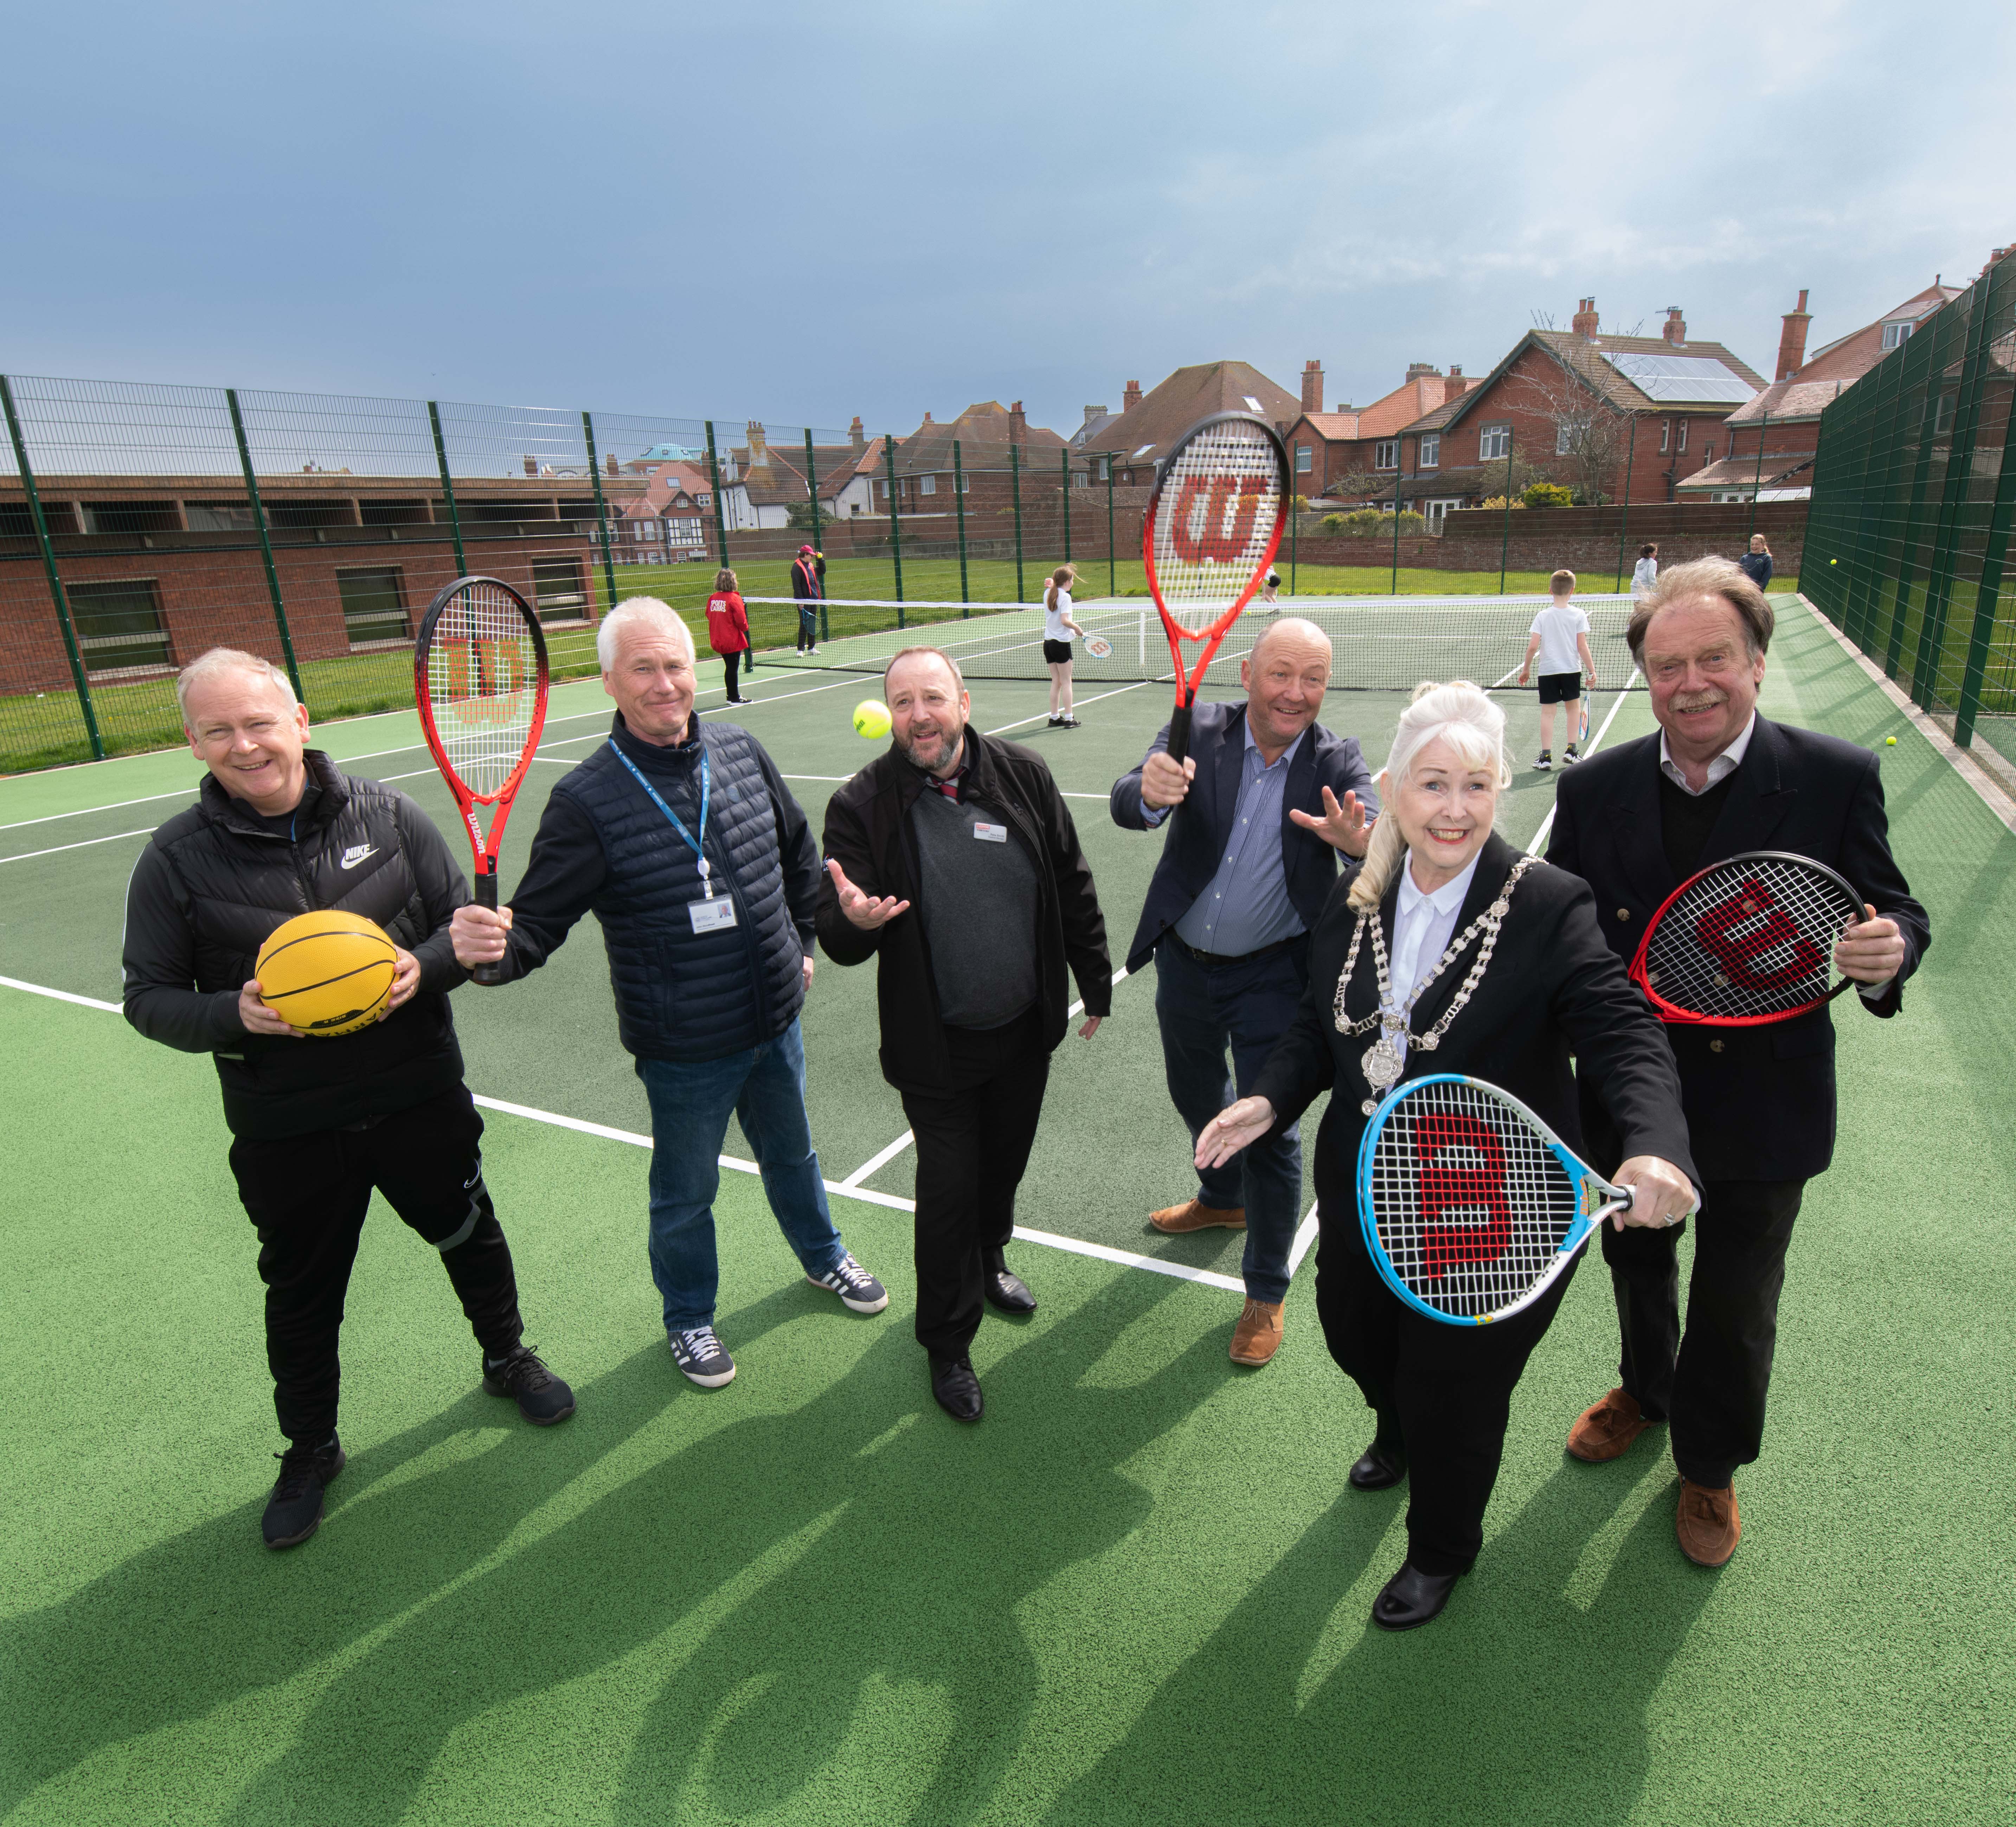 North Yorkshire Council sports development manager, Matt Hewison, North Yorkshire Council northern area engineer, John Woodhead, Everyone Active contracts manager, Peter Smith, North Yorkshire Council local member for Whitby West division, Cllr Phil Trumper, Mayor of Whitby, Cllr Linda Wild, and North Yorkshire Council’s executive member for culture, arts and housing, Cllr Simon Myers.